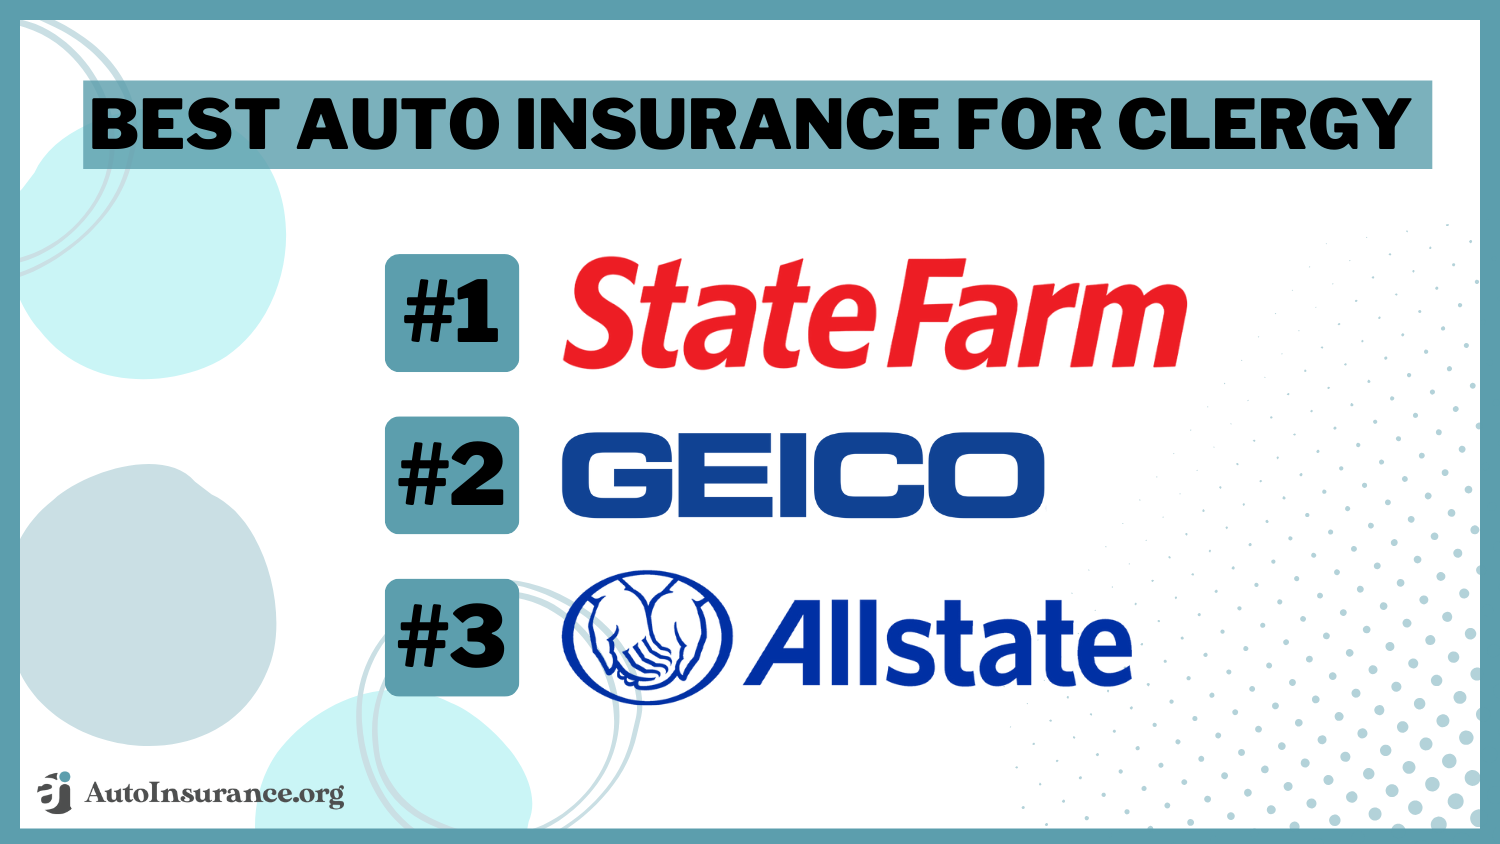 Best Auto Insurance for Clergy: State Farm, Geico, Allstate